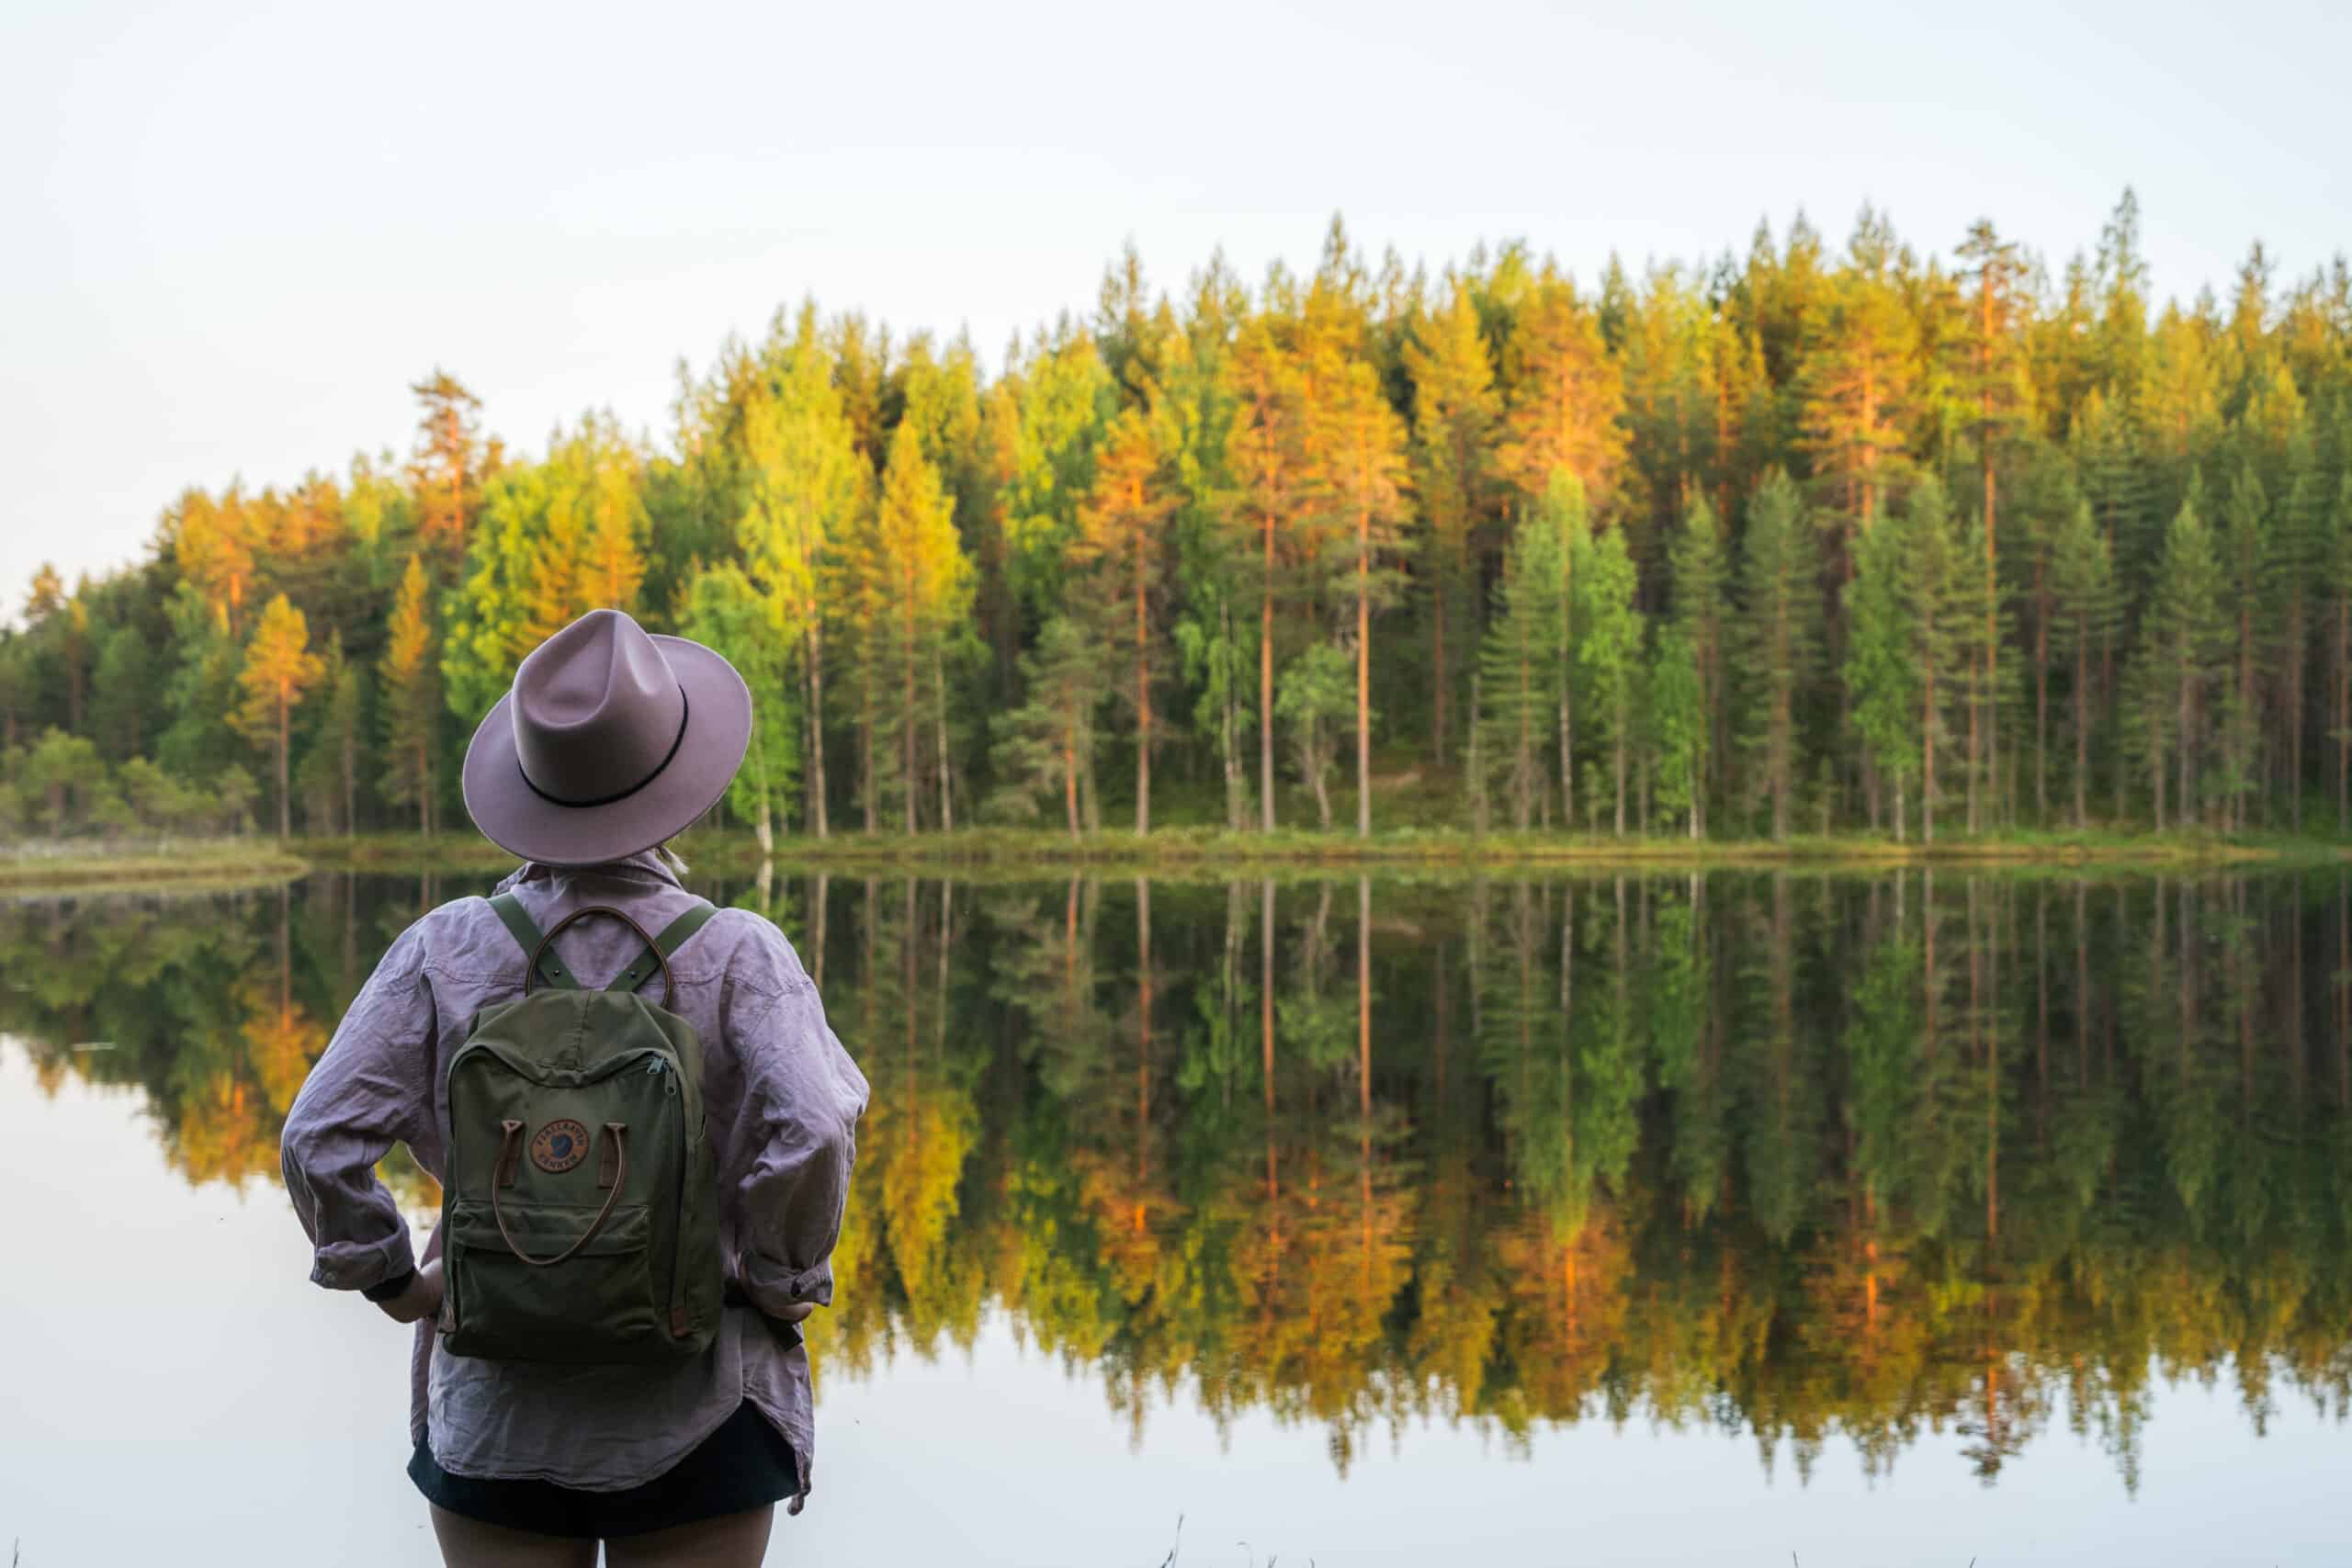 Person standing in front of a lake and forest.